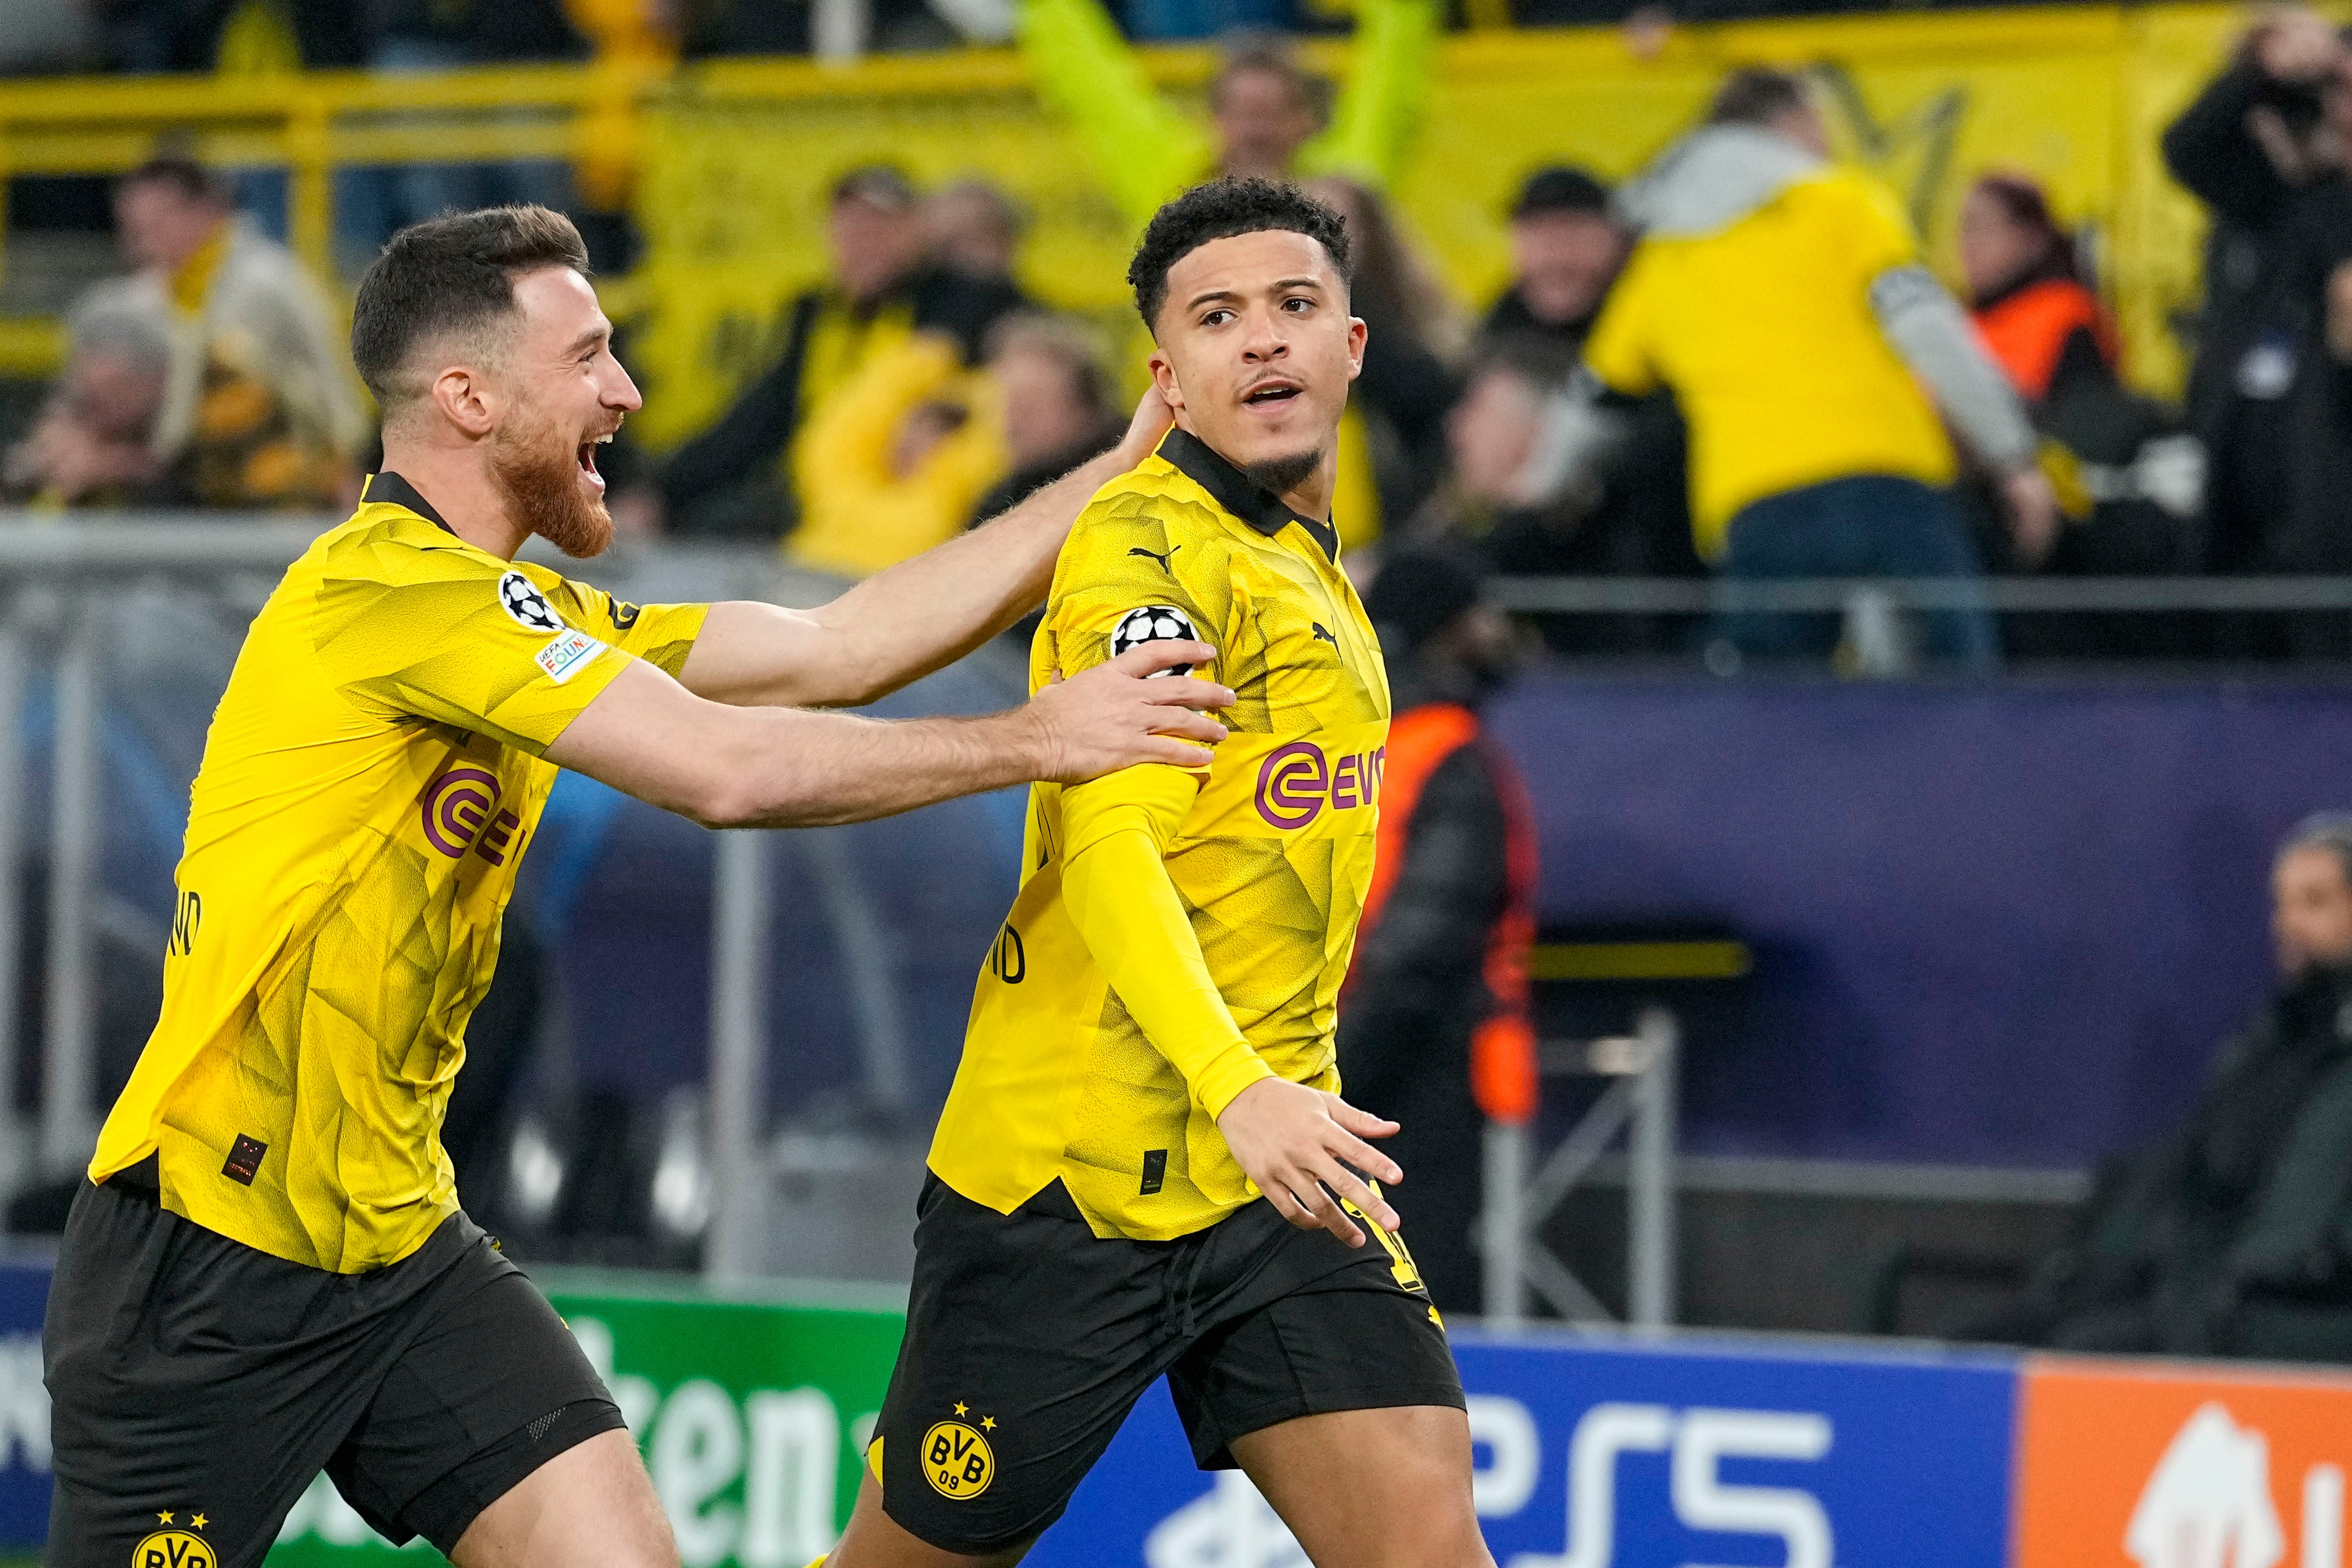 Sancho, on loan from Manchester United, put Dortmund in control